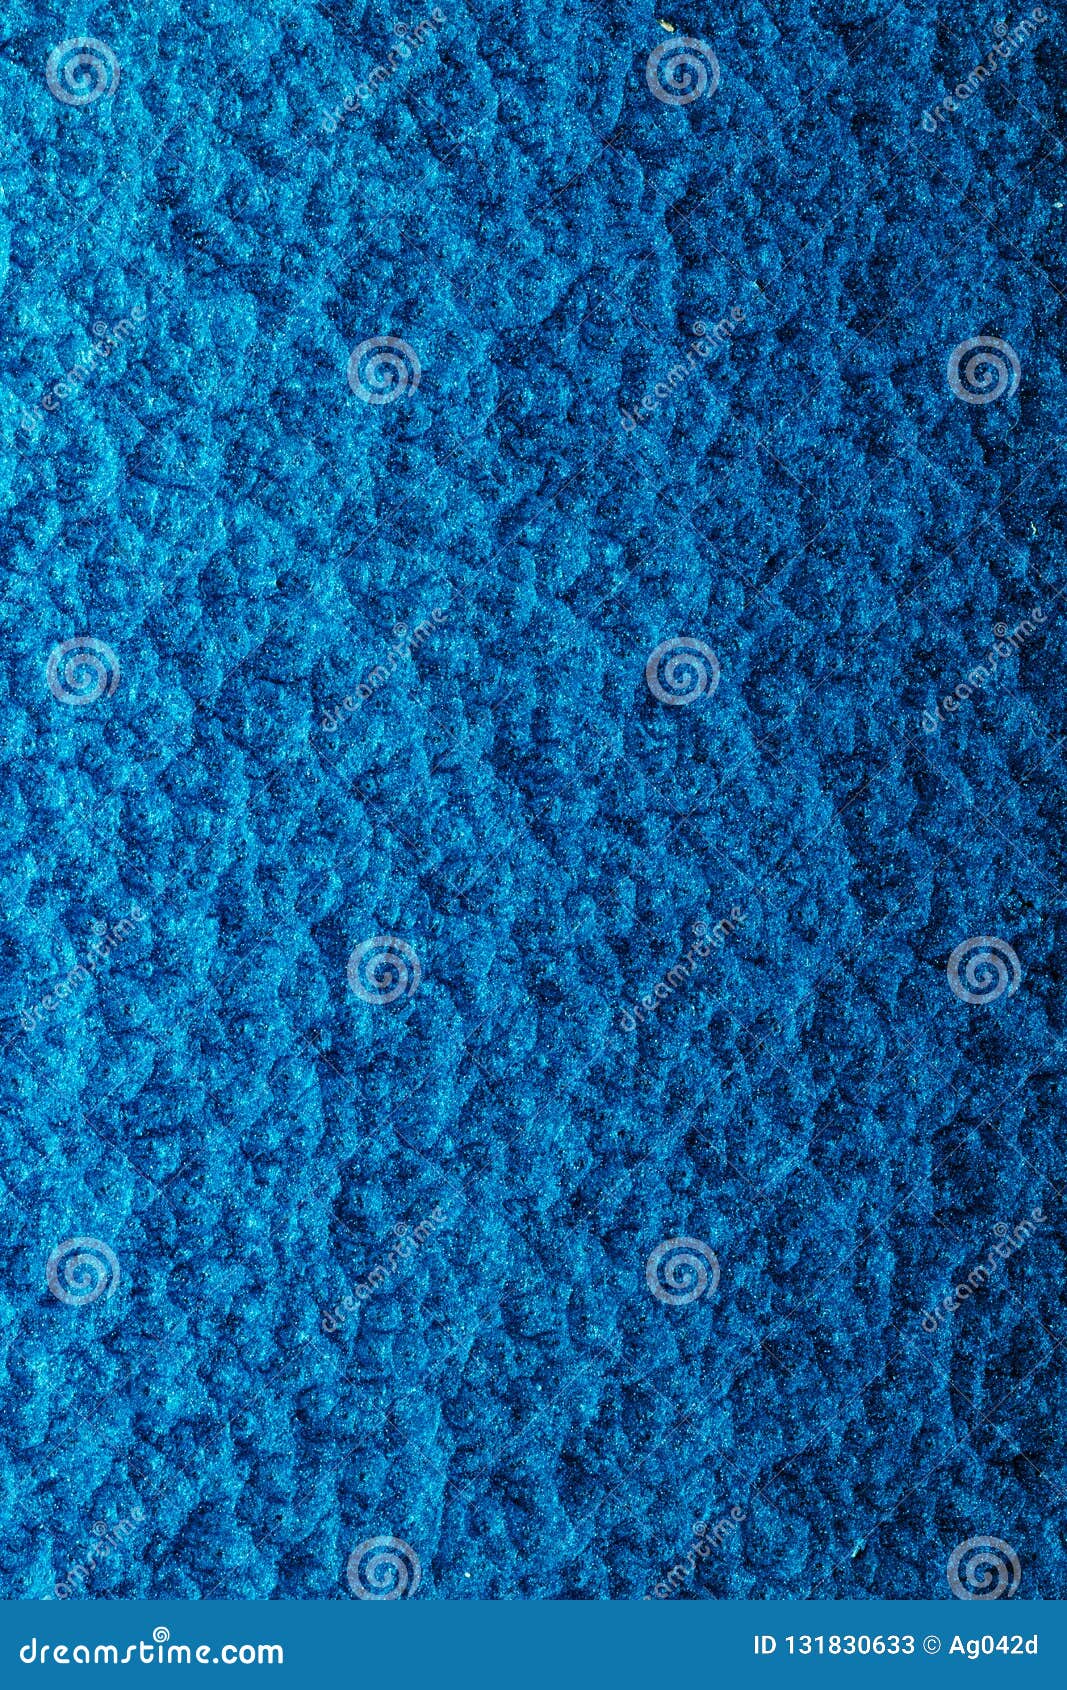 Blue Hammered Metal Background abstract Metalic Texture 